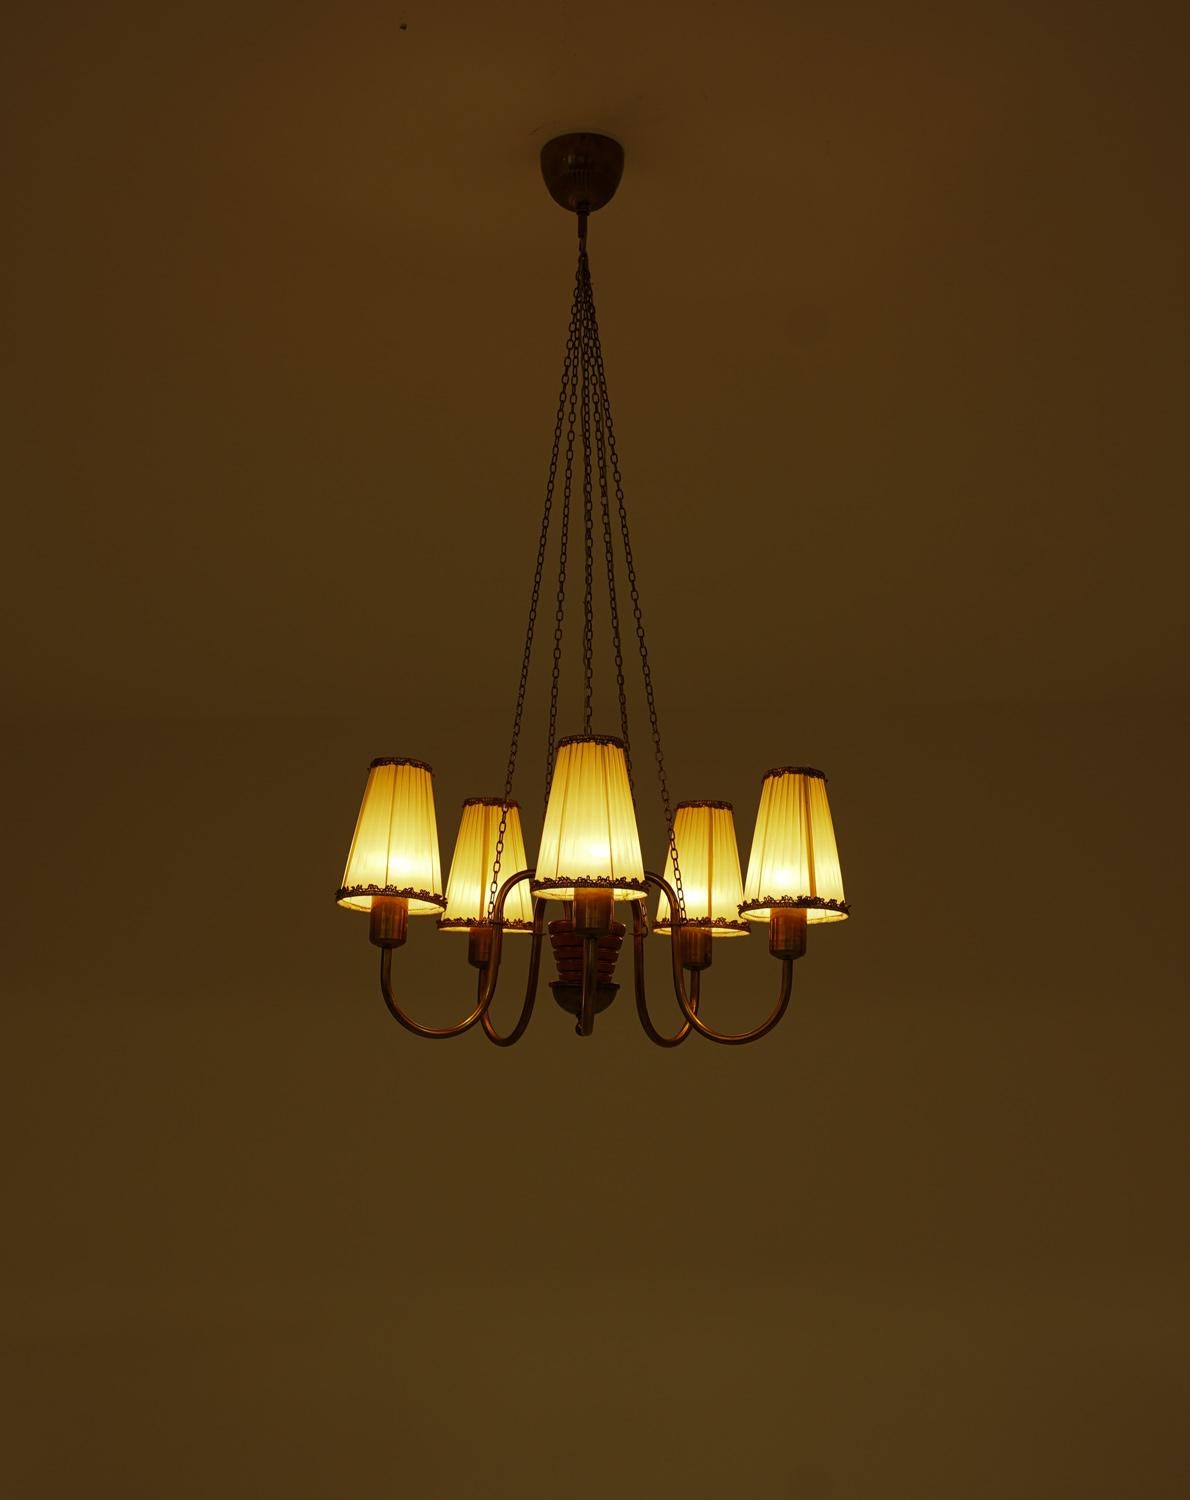 Swedish Modern Chandelier in Brass and Wood, 1940s For Sale 3